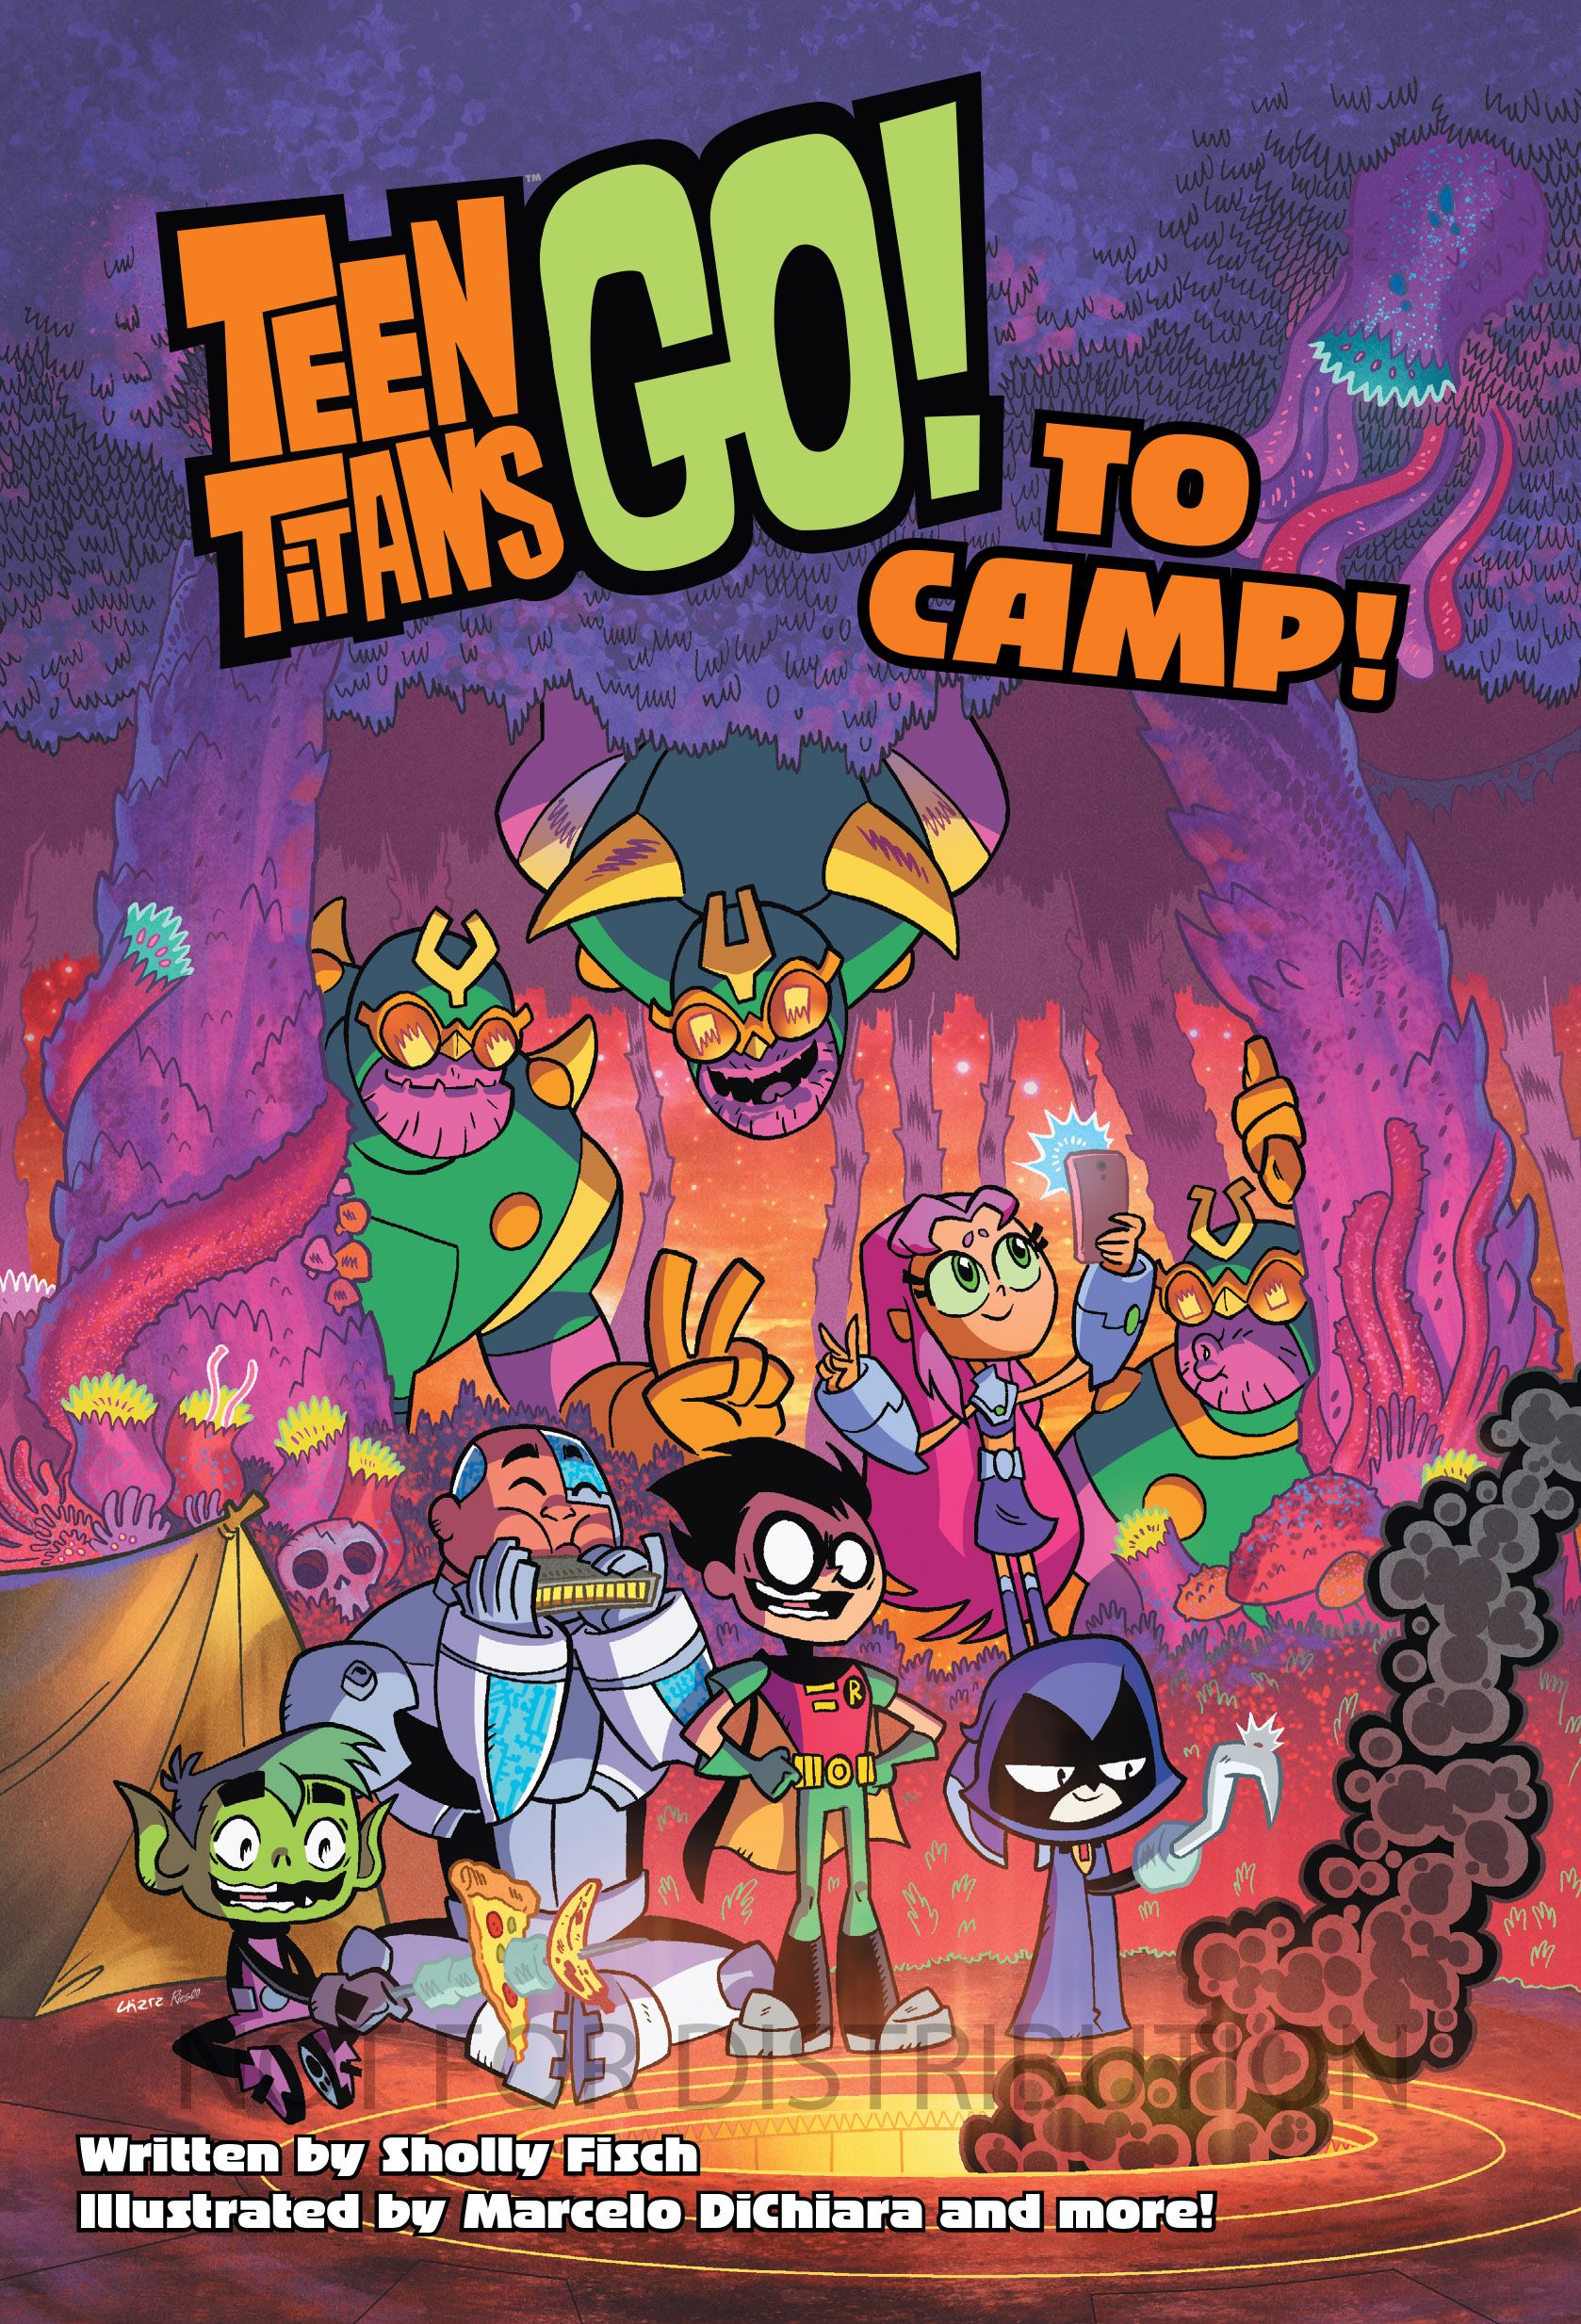 Teen Titans GO! To Camp cover